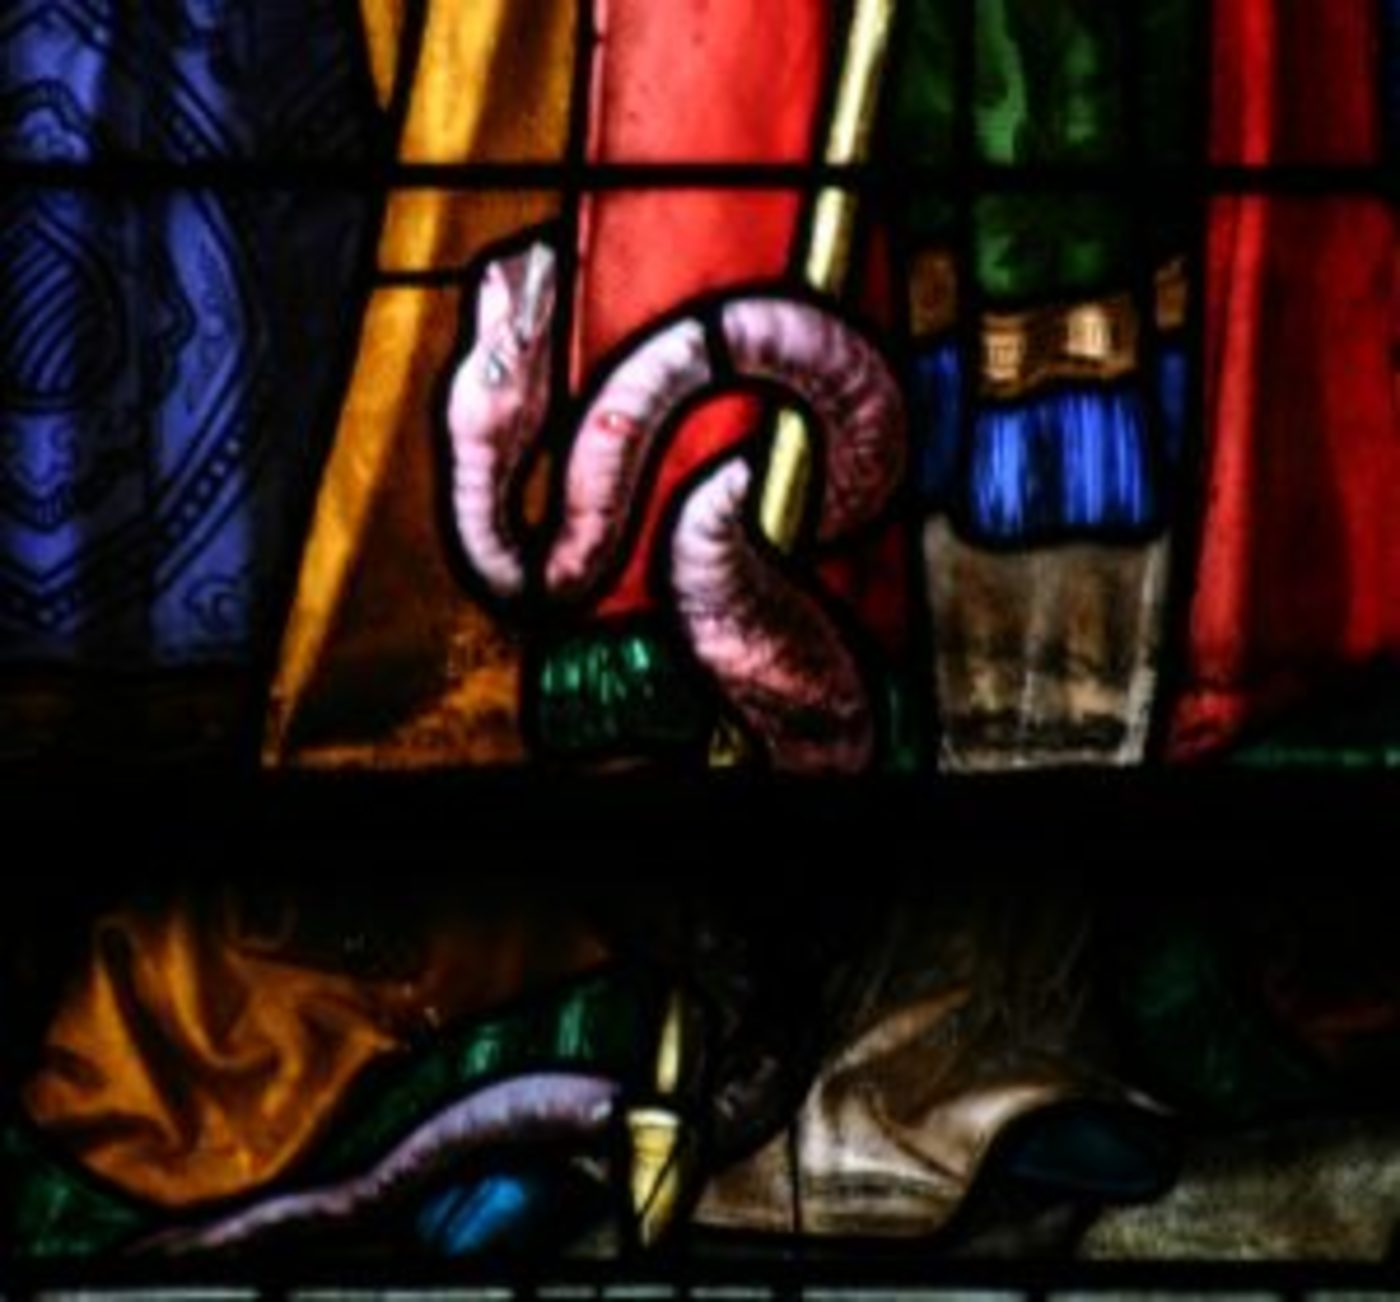 Windows 13A and 13B: Saint Patrick of Ireland and St. Stephen, Deacon